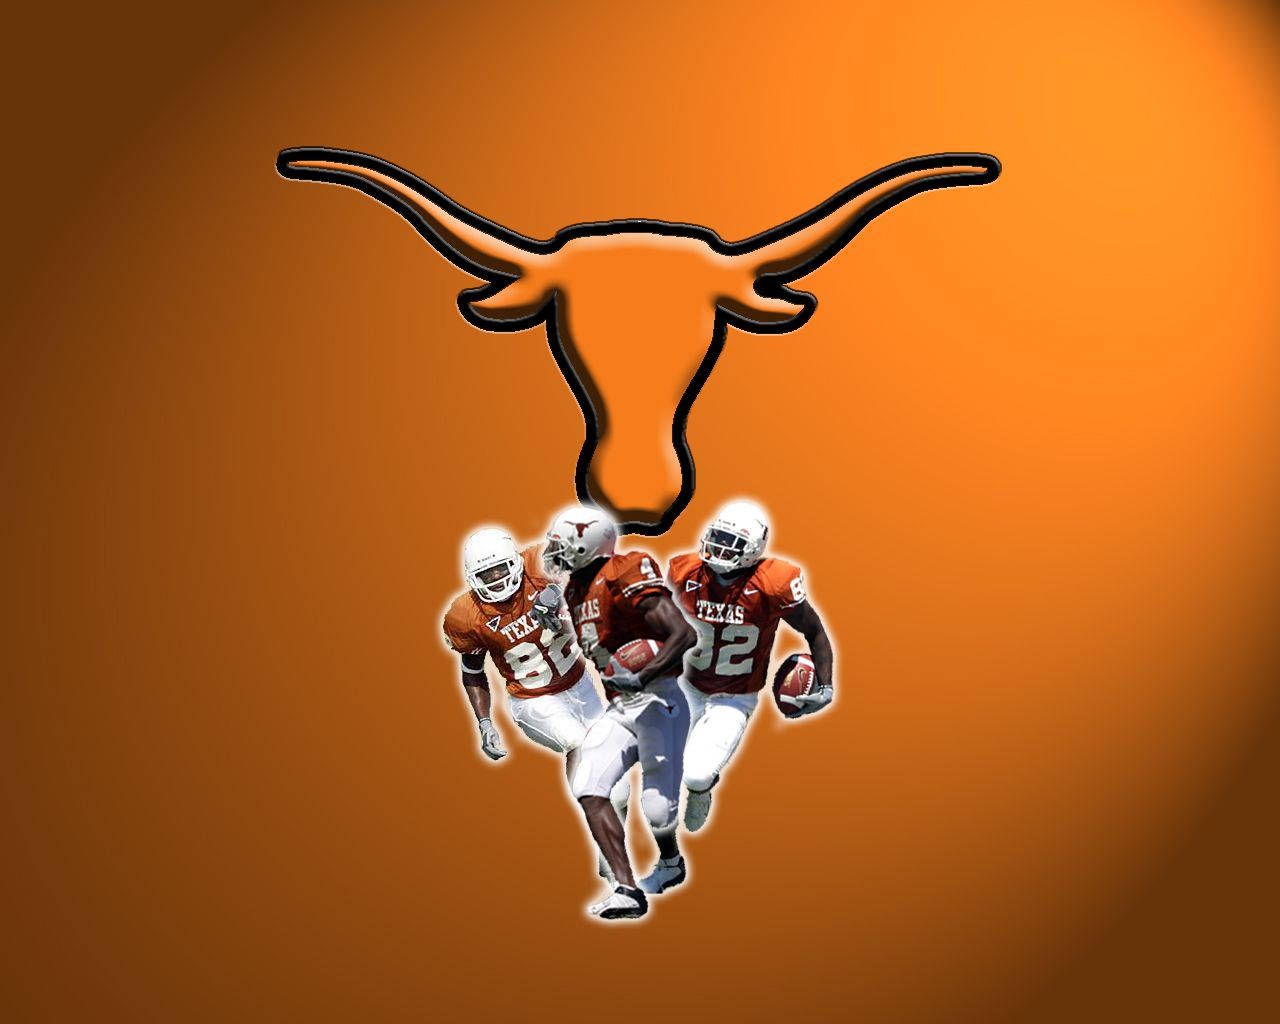 The Texas Longhorns logo with three football players in front of it - Longhorn